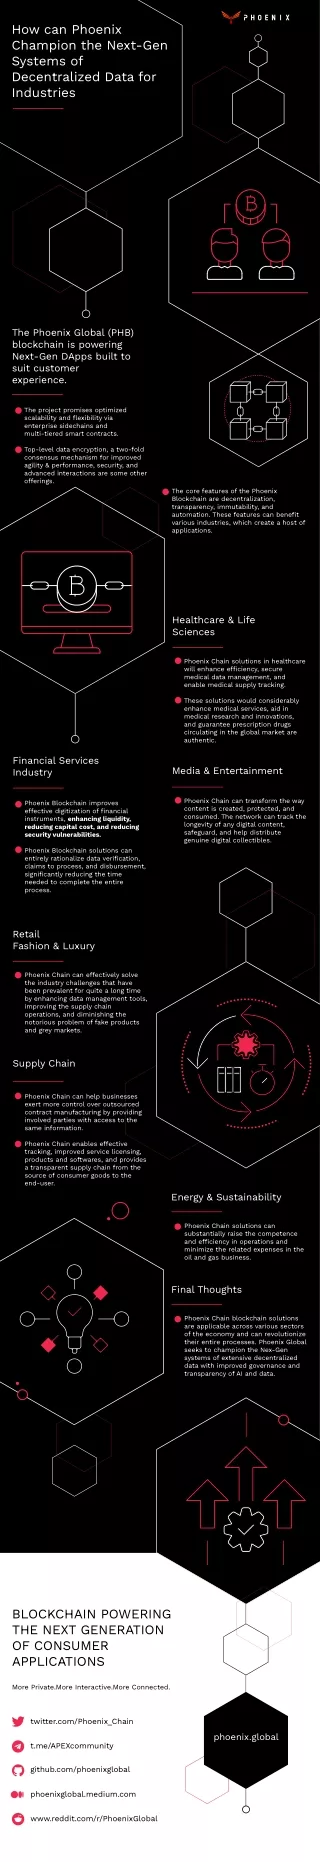 Industries that would Benefit from Phoenix Blockchain